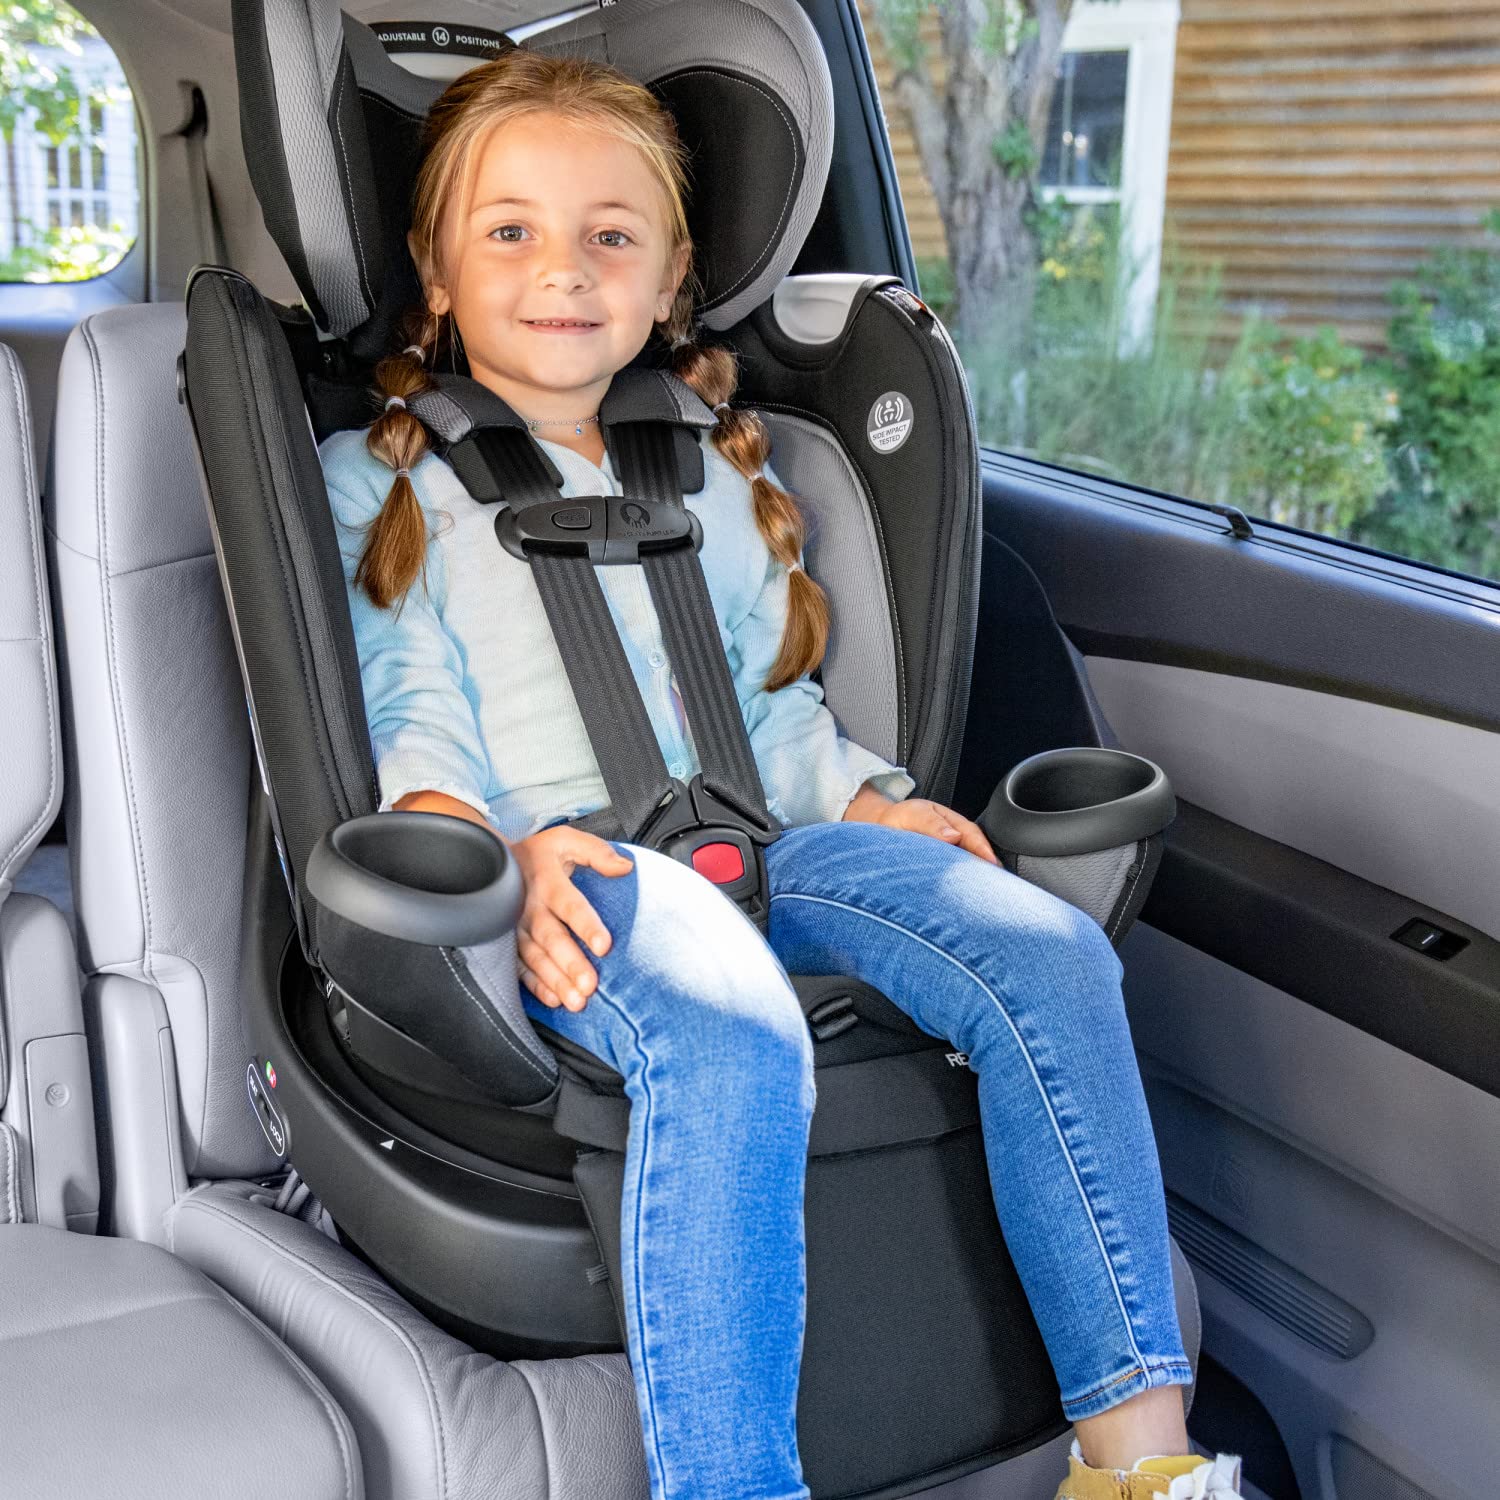 Evenflo Revolve360 Extend All-in-One Rotational Car Seat with Quick Clean Cover (Rowe Pink)